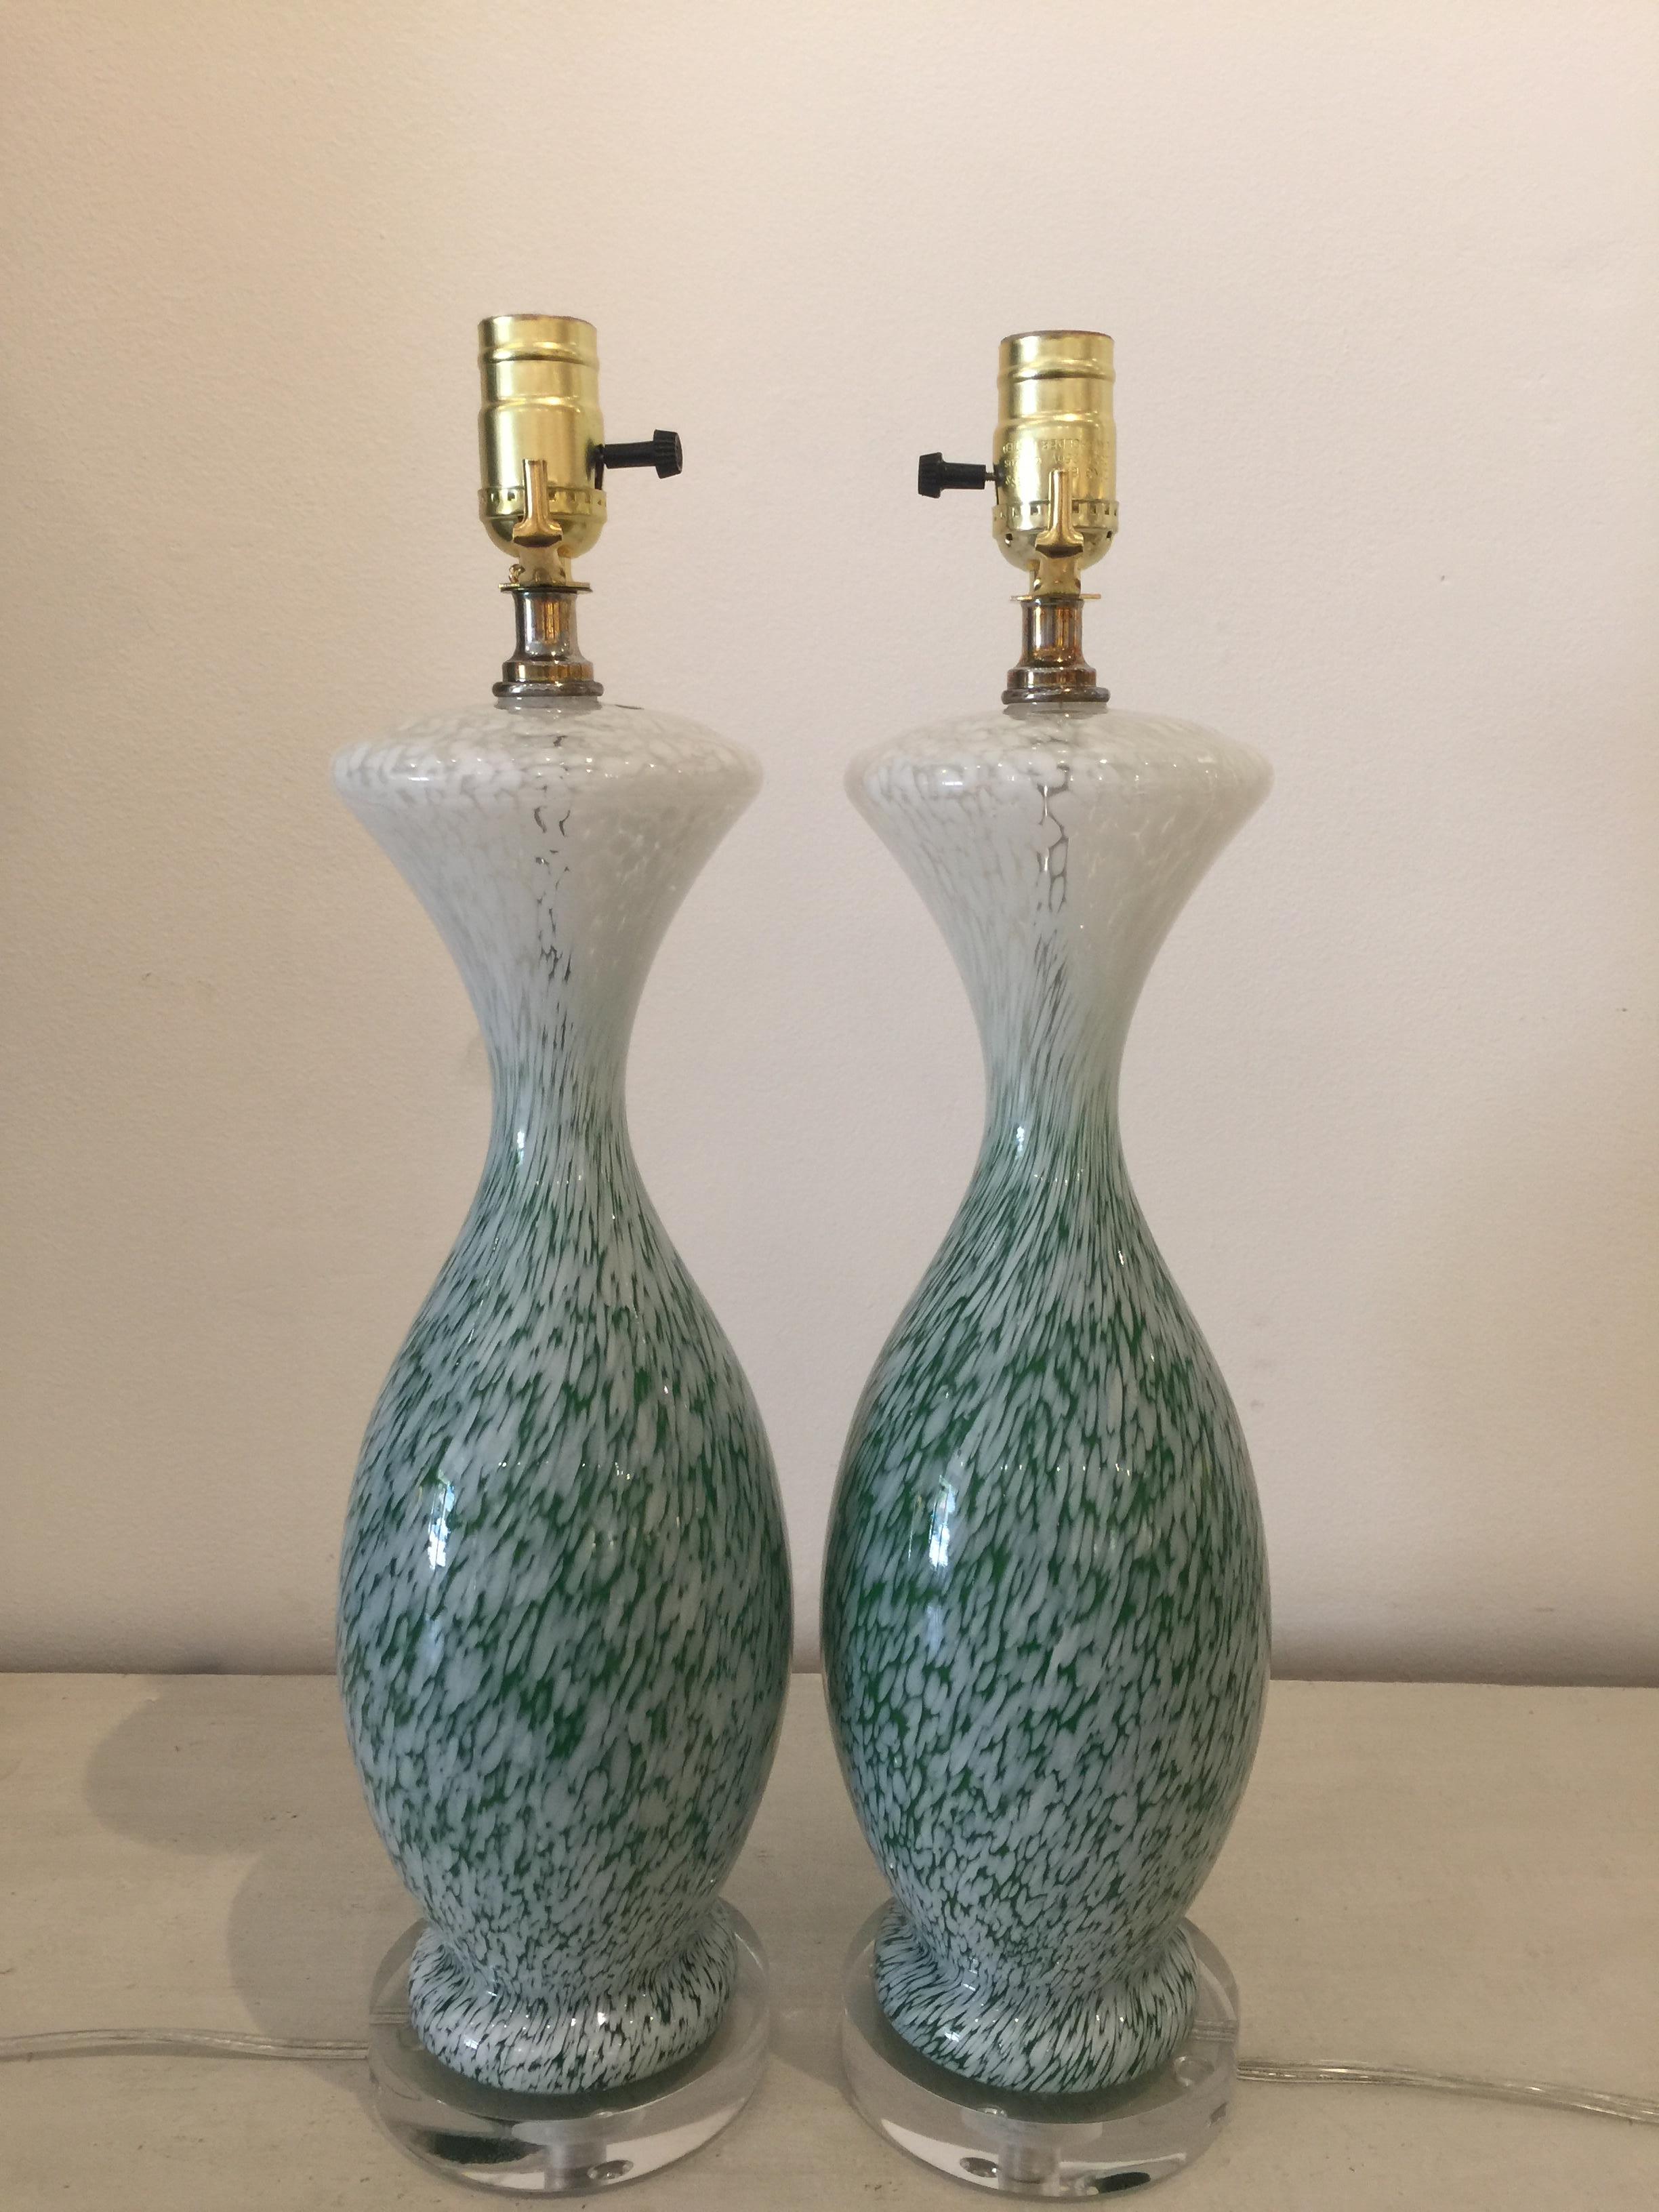 20th Century Pair of Vintage French Green and White Glass Table Lamps on Lucite Bases, 1960s